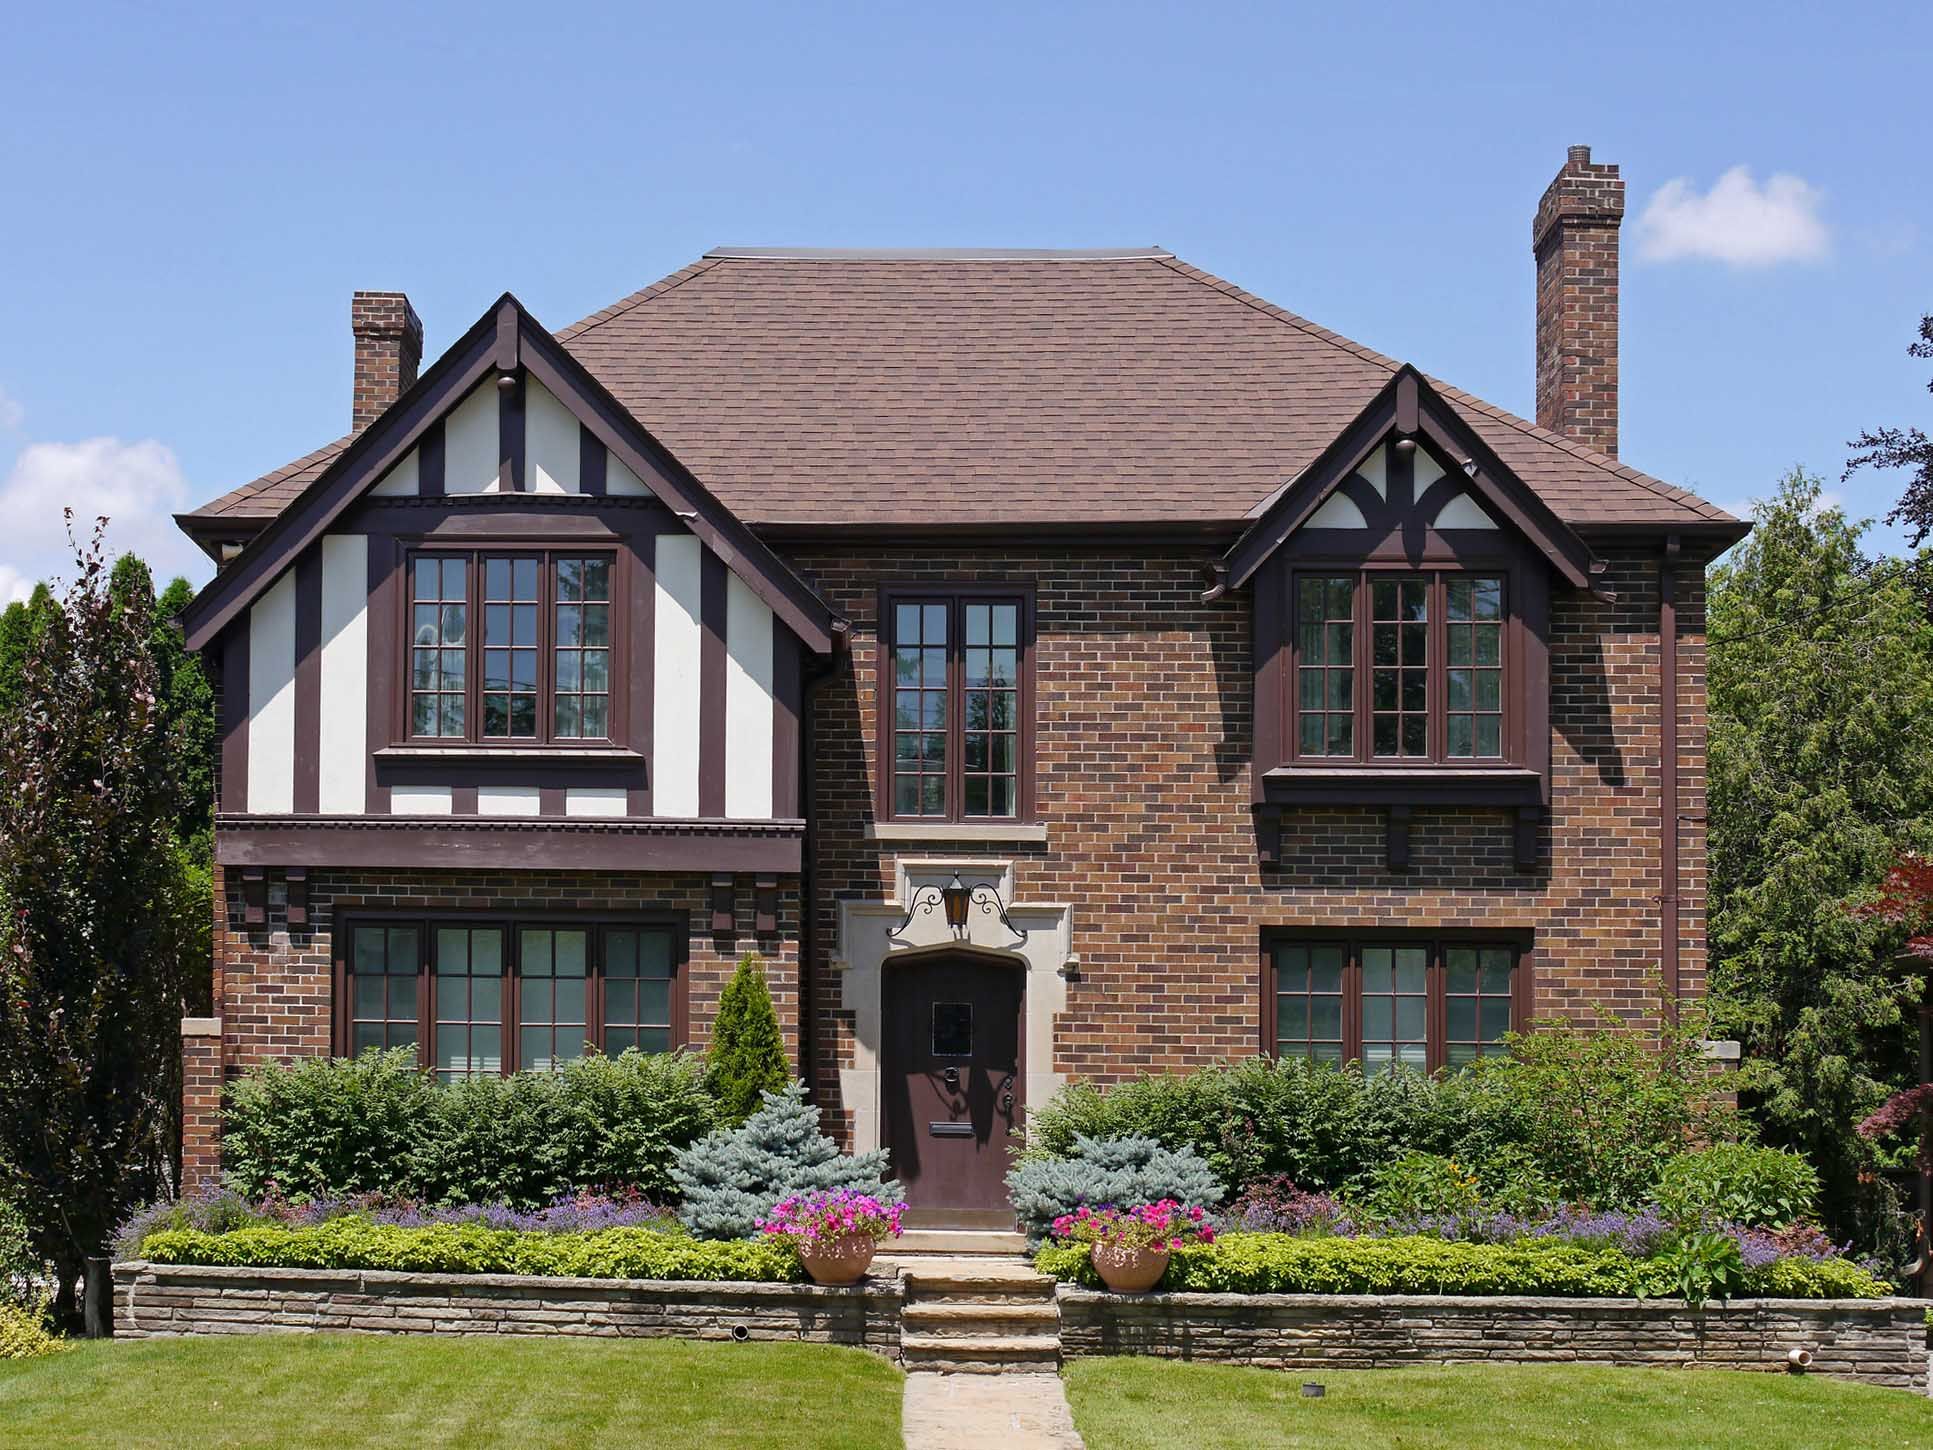 What Is a Tudor-Style House? - The Characteristics of a Tudor Style Home